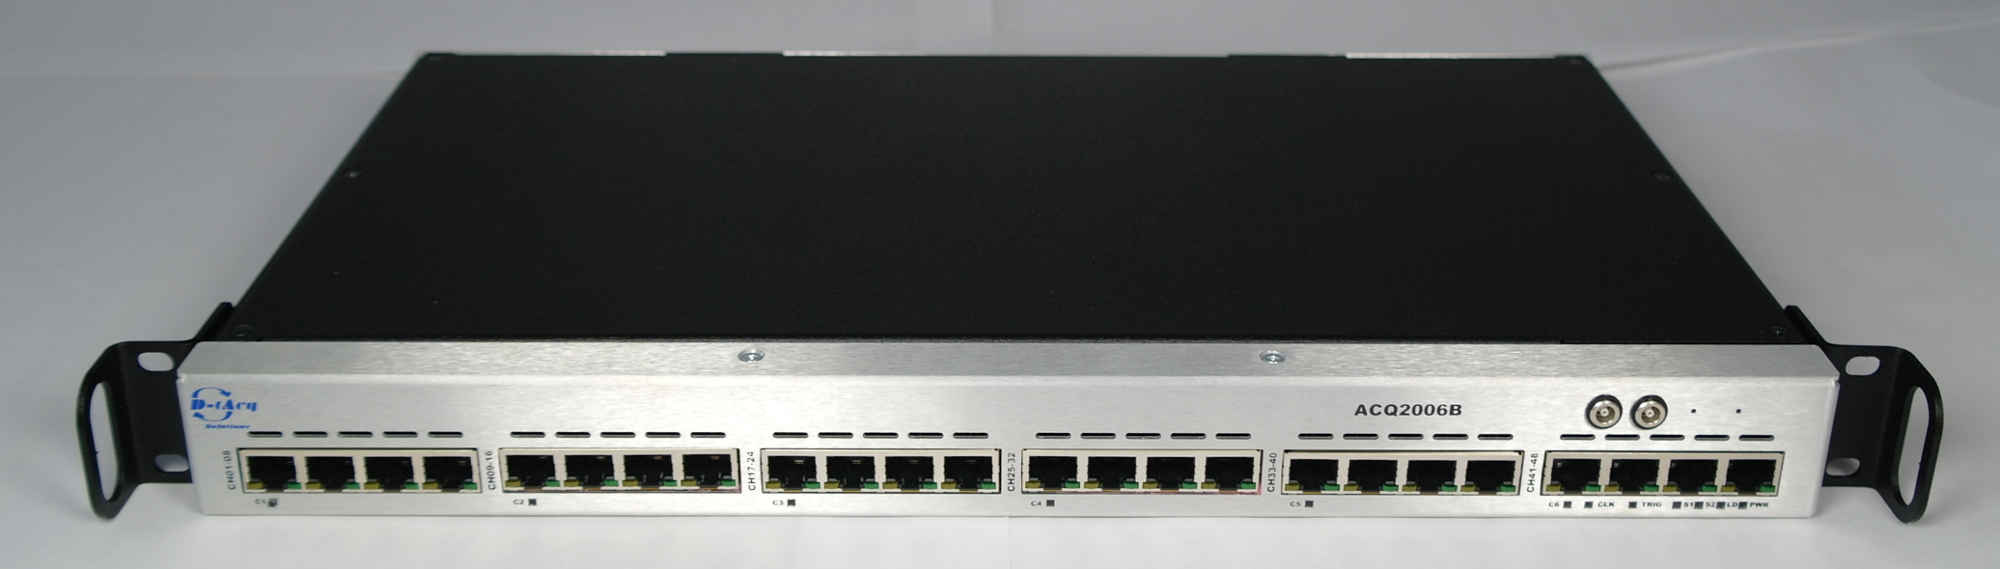 RJ45 front panel example